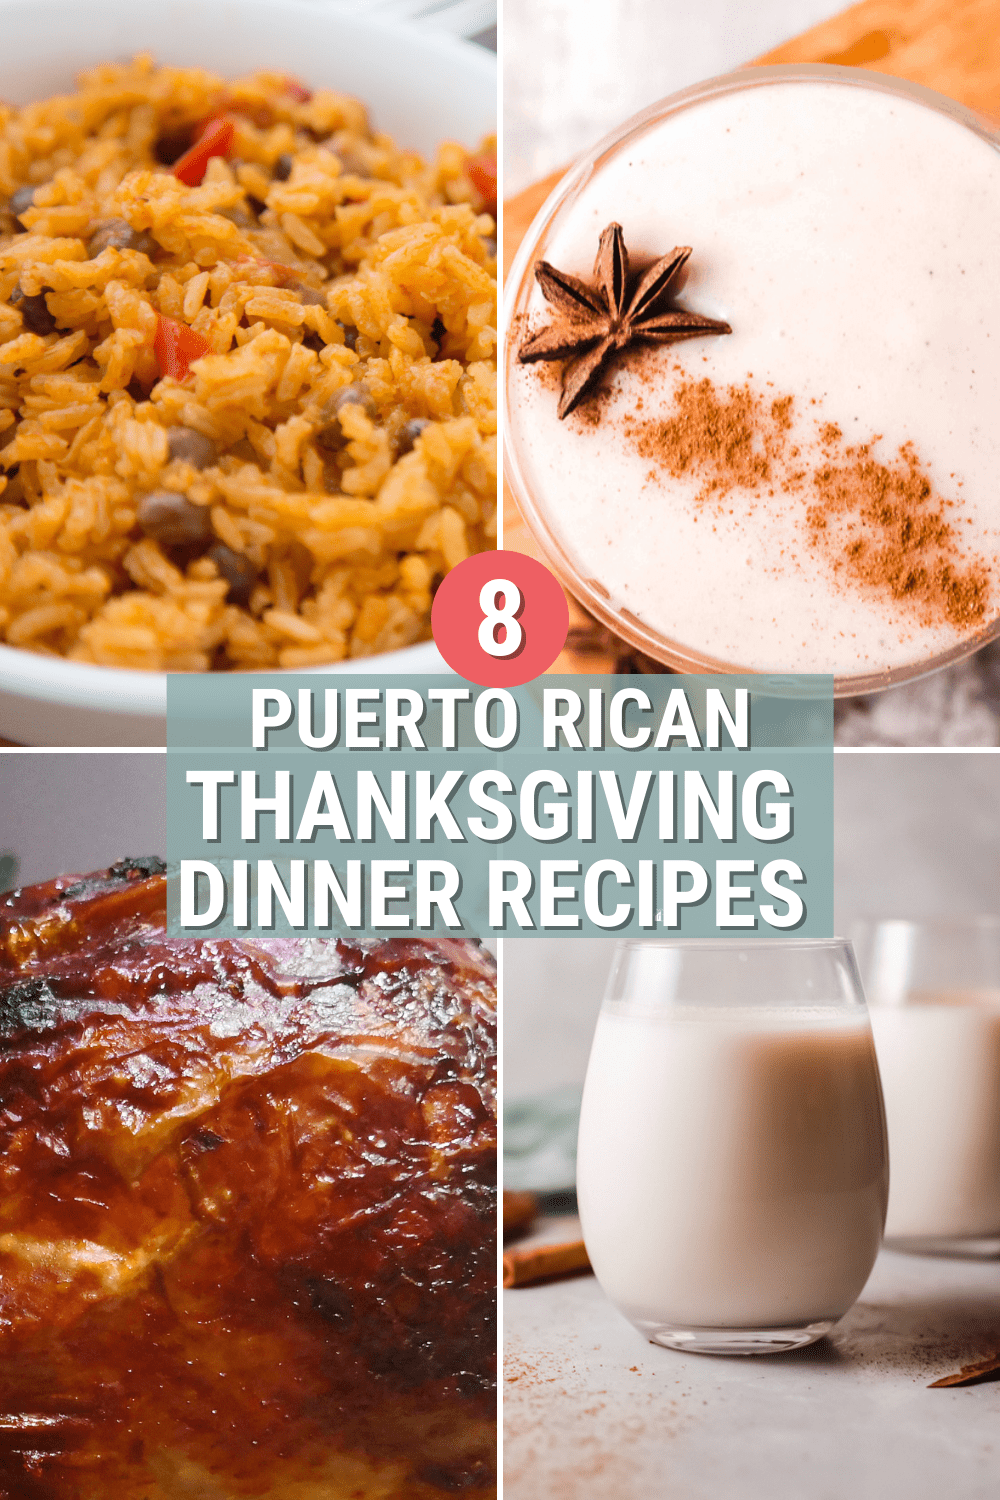 This year, try these delicious Puerto Rican recipes for your Thanksgiving feast. You won't be disappointed! #puertoricanrecipes #PuertoRicanThanksgiving via @mystayathome